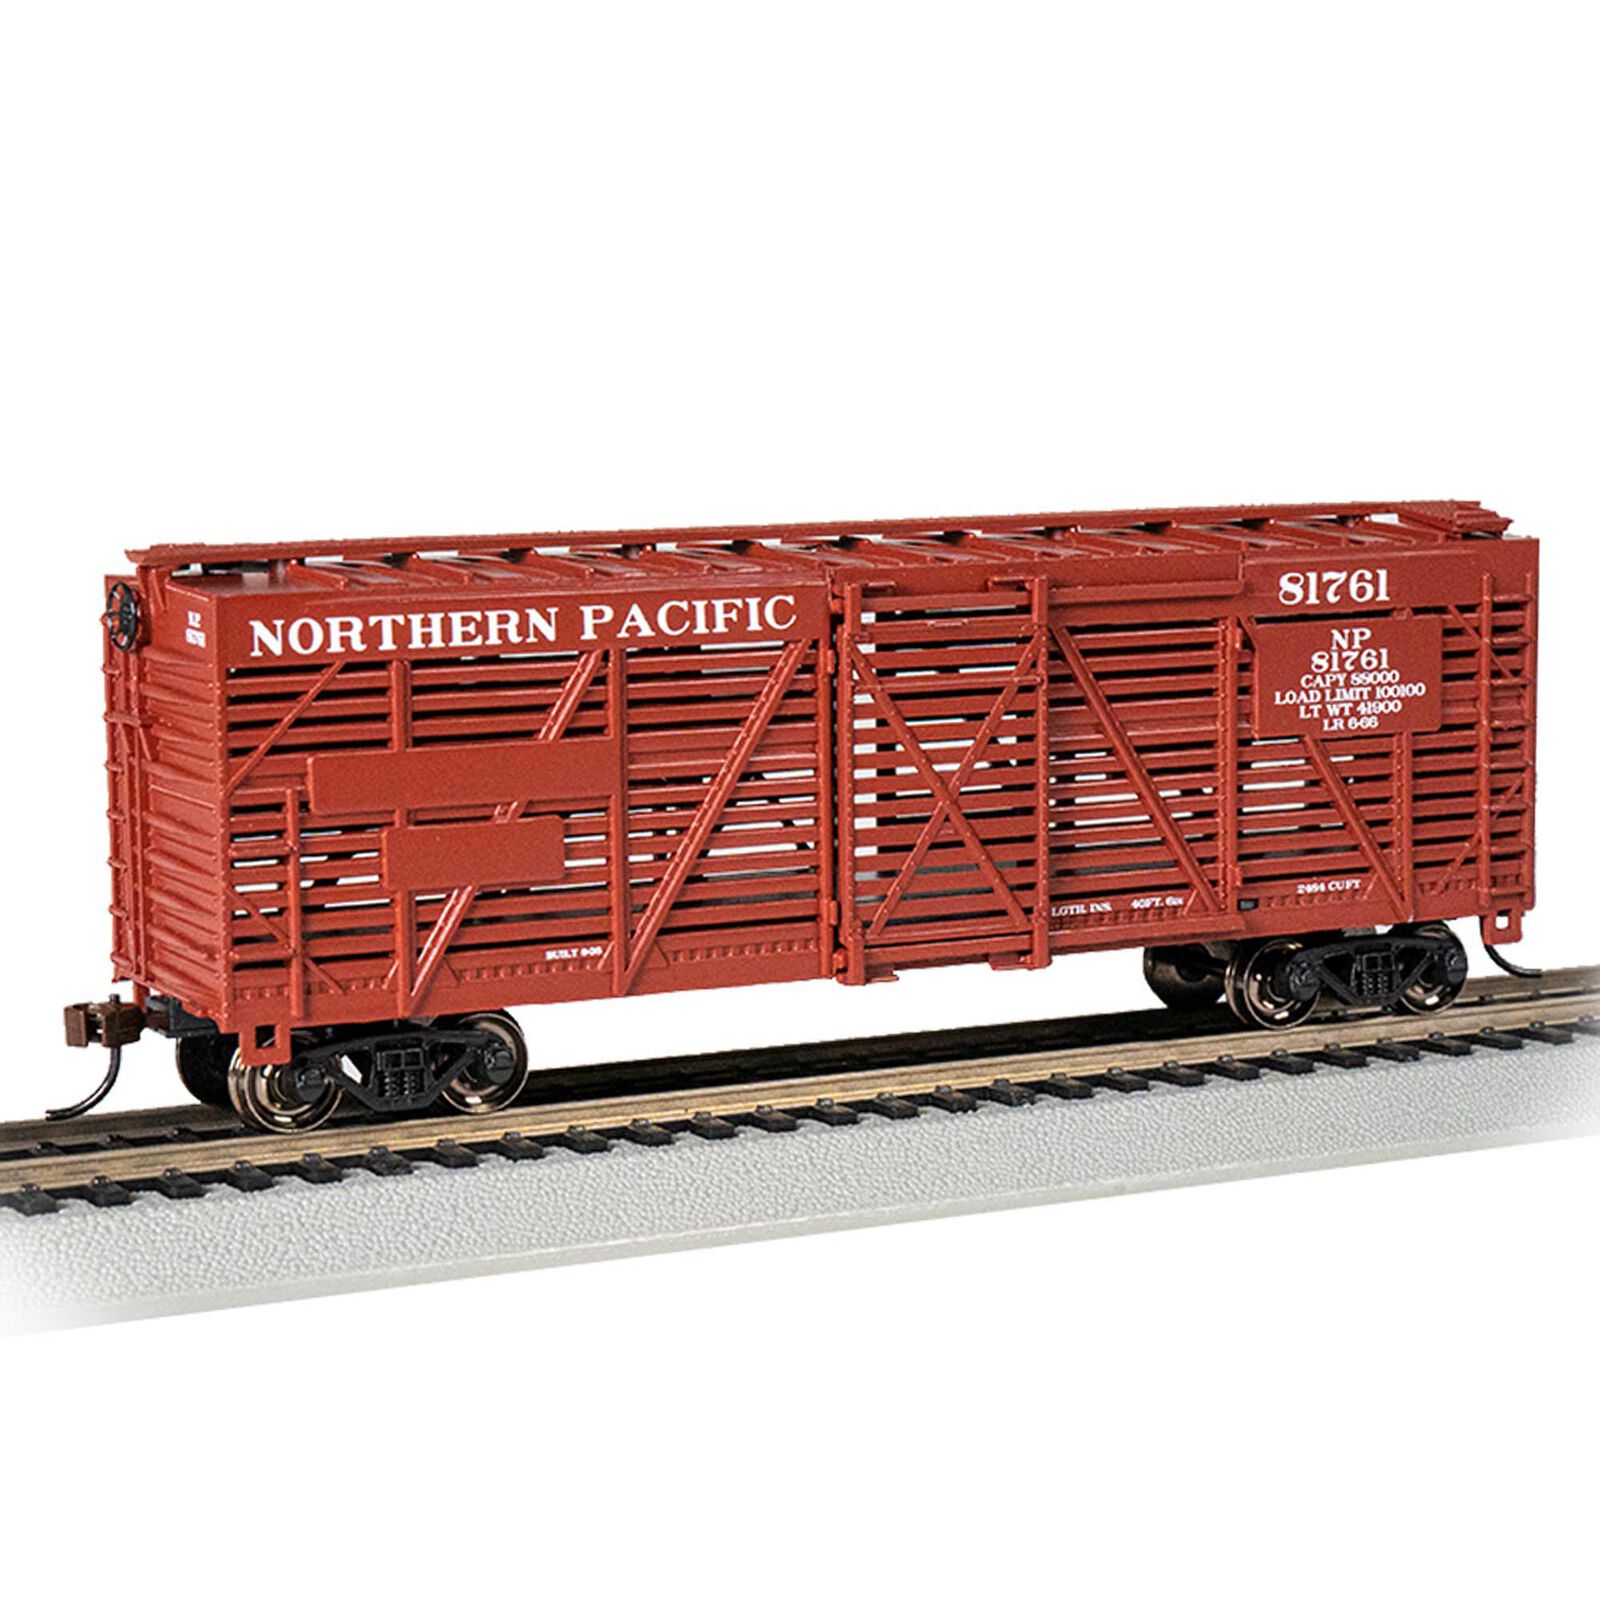 NORTHERN PACIFIC #81761